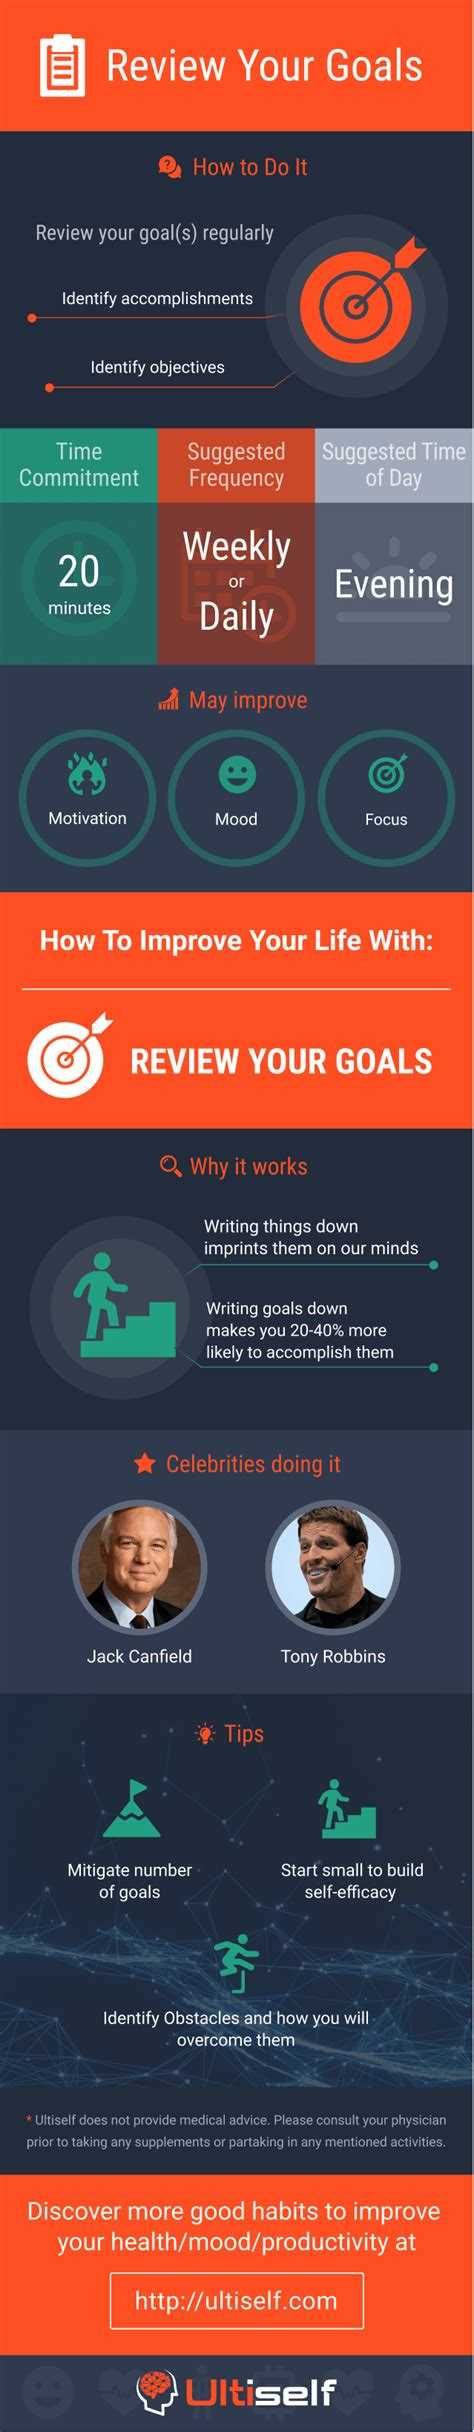 Review your goals